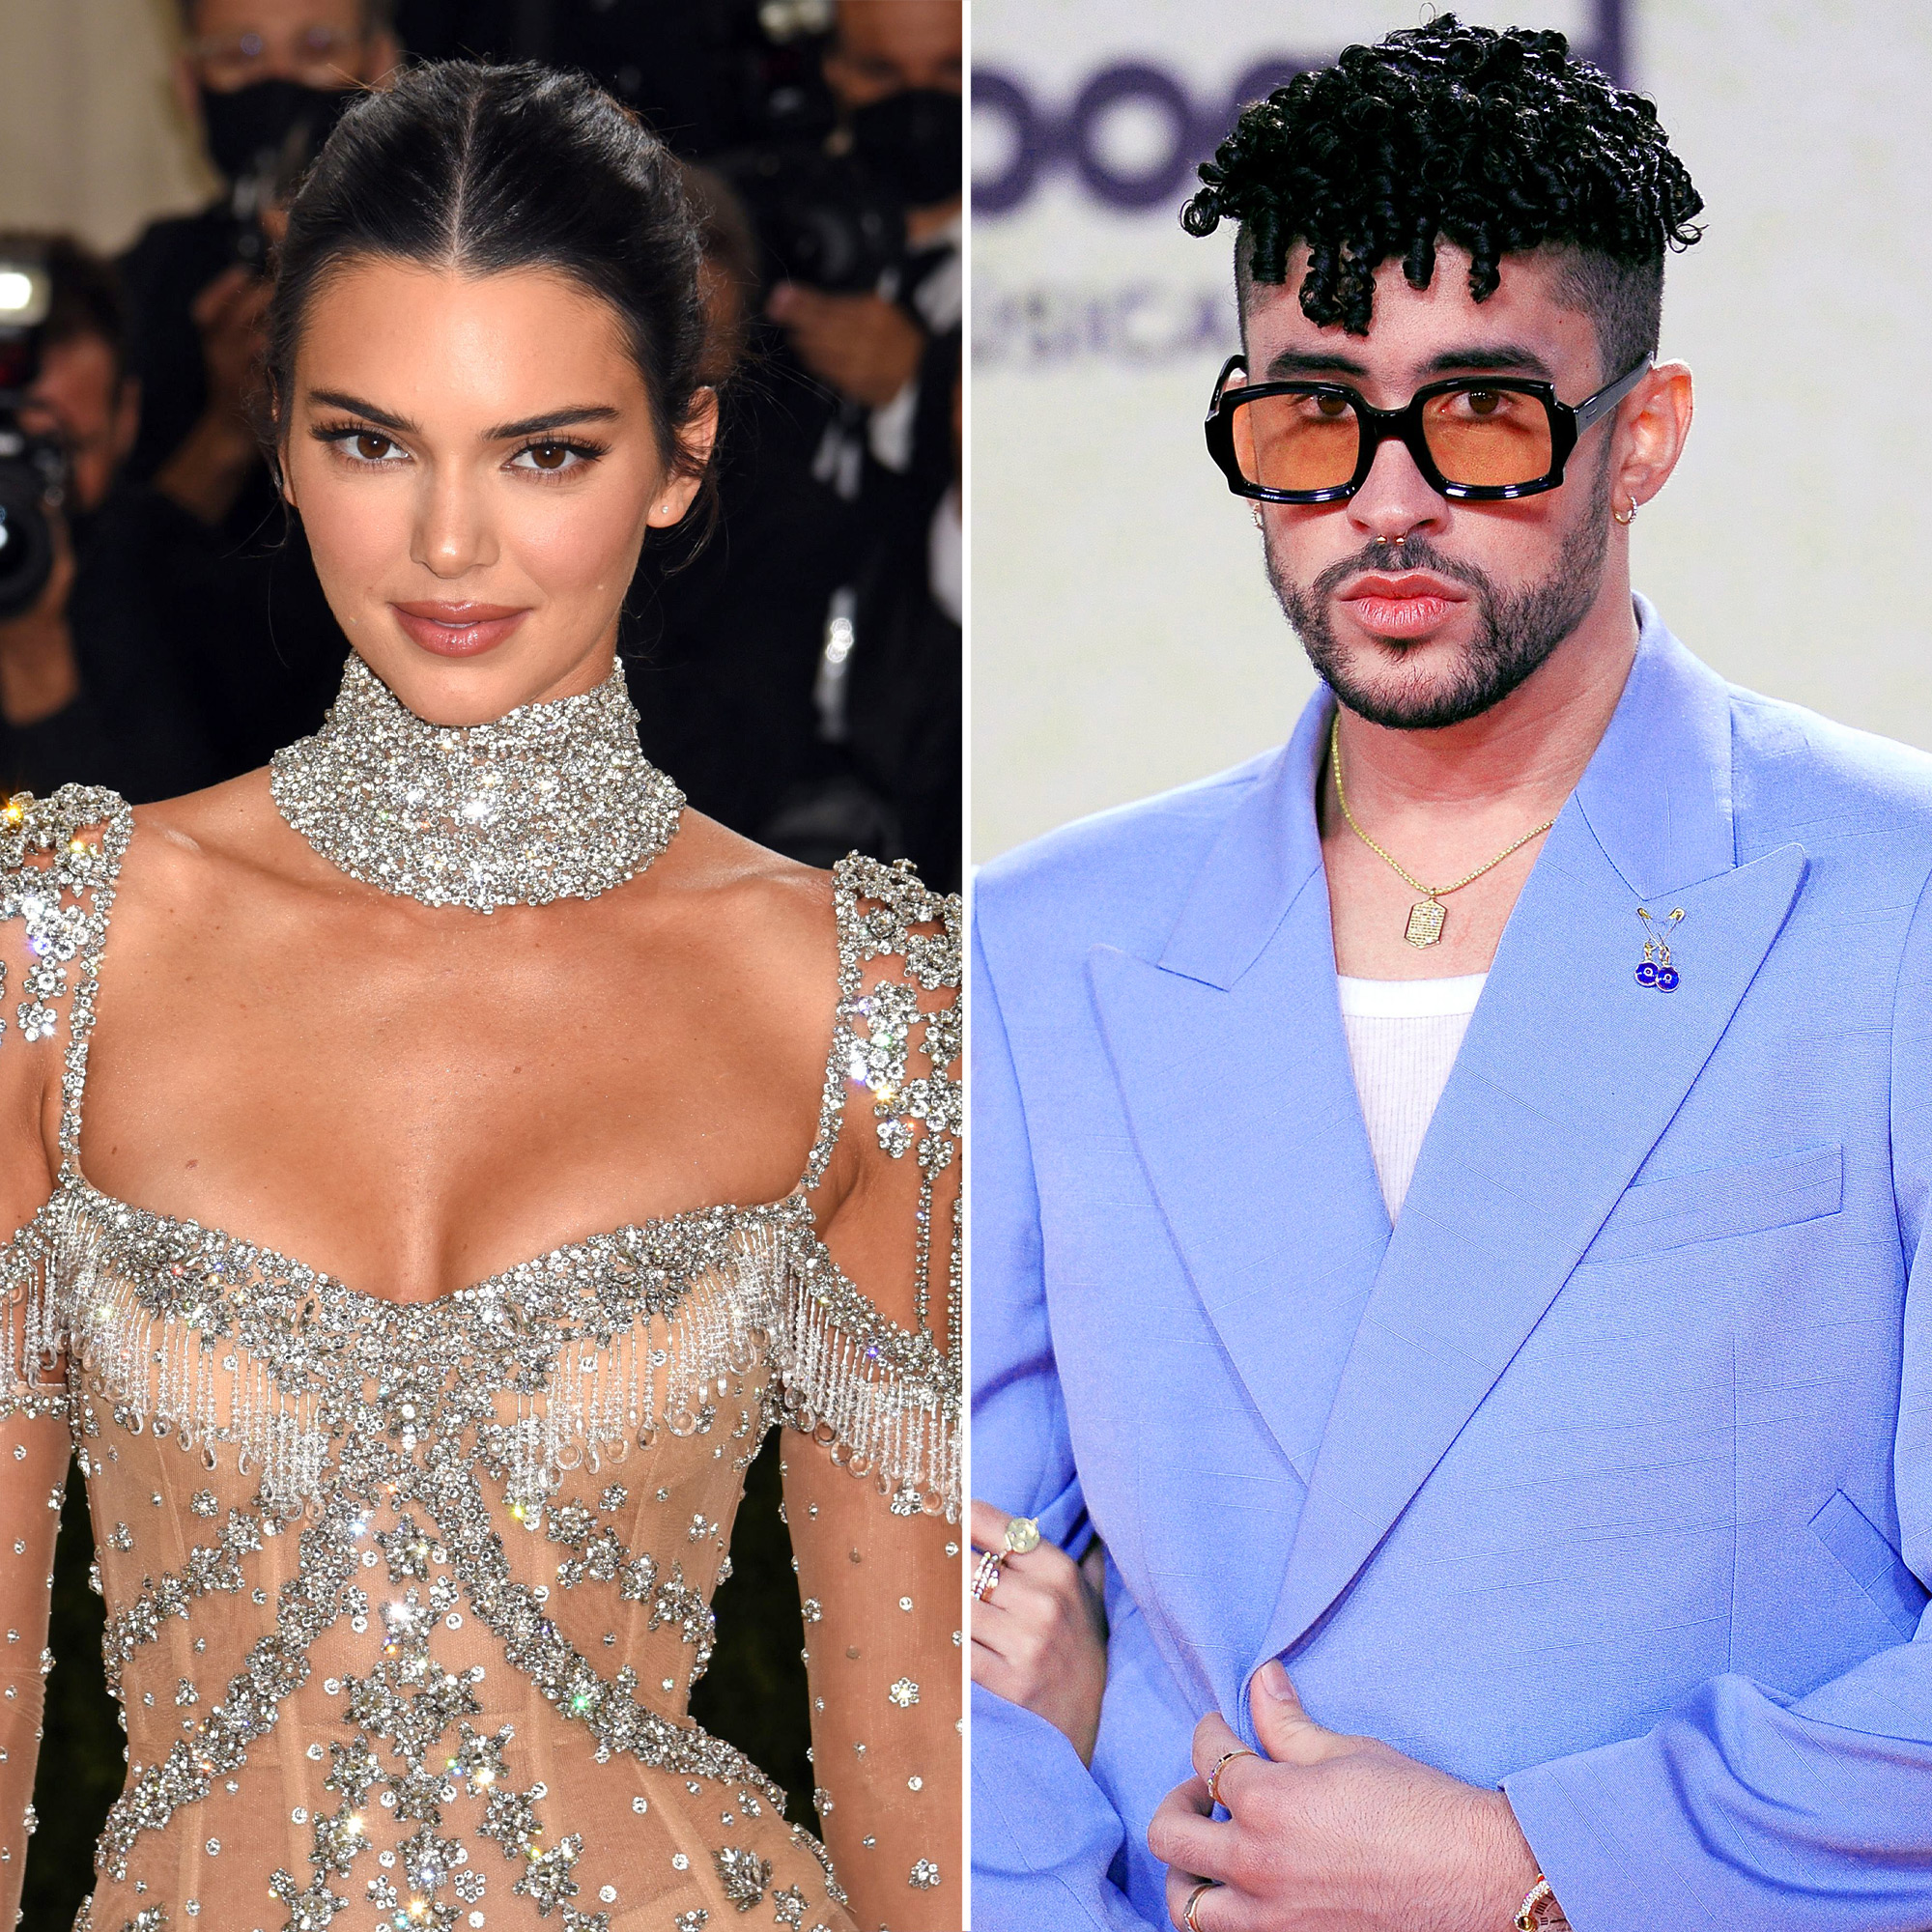 https://www.usmagazine.com/wp-content/uploads/2023/08/Kendall-Jenner-and-Bad-Bunny-Romance-Has-Grown-Even-Stronger.jpg?quality=86&strip=all